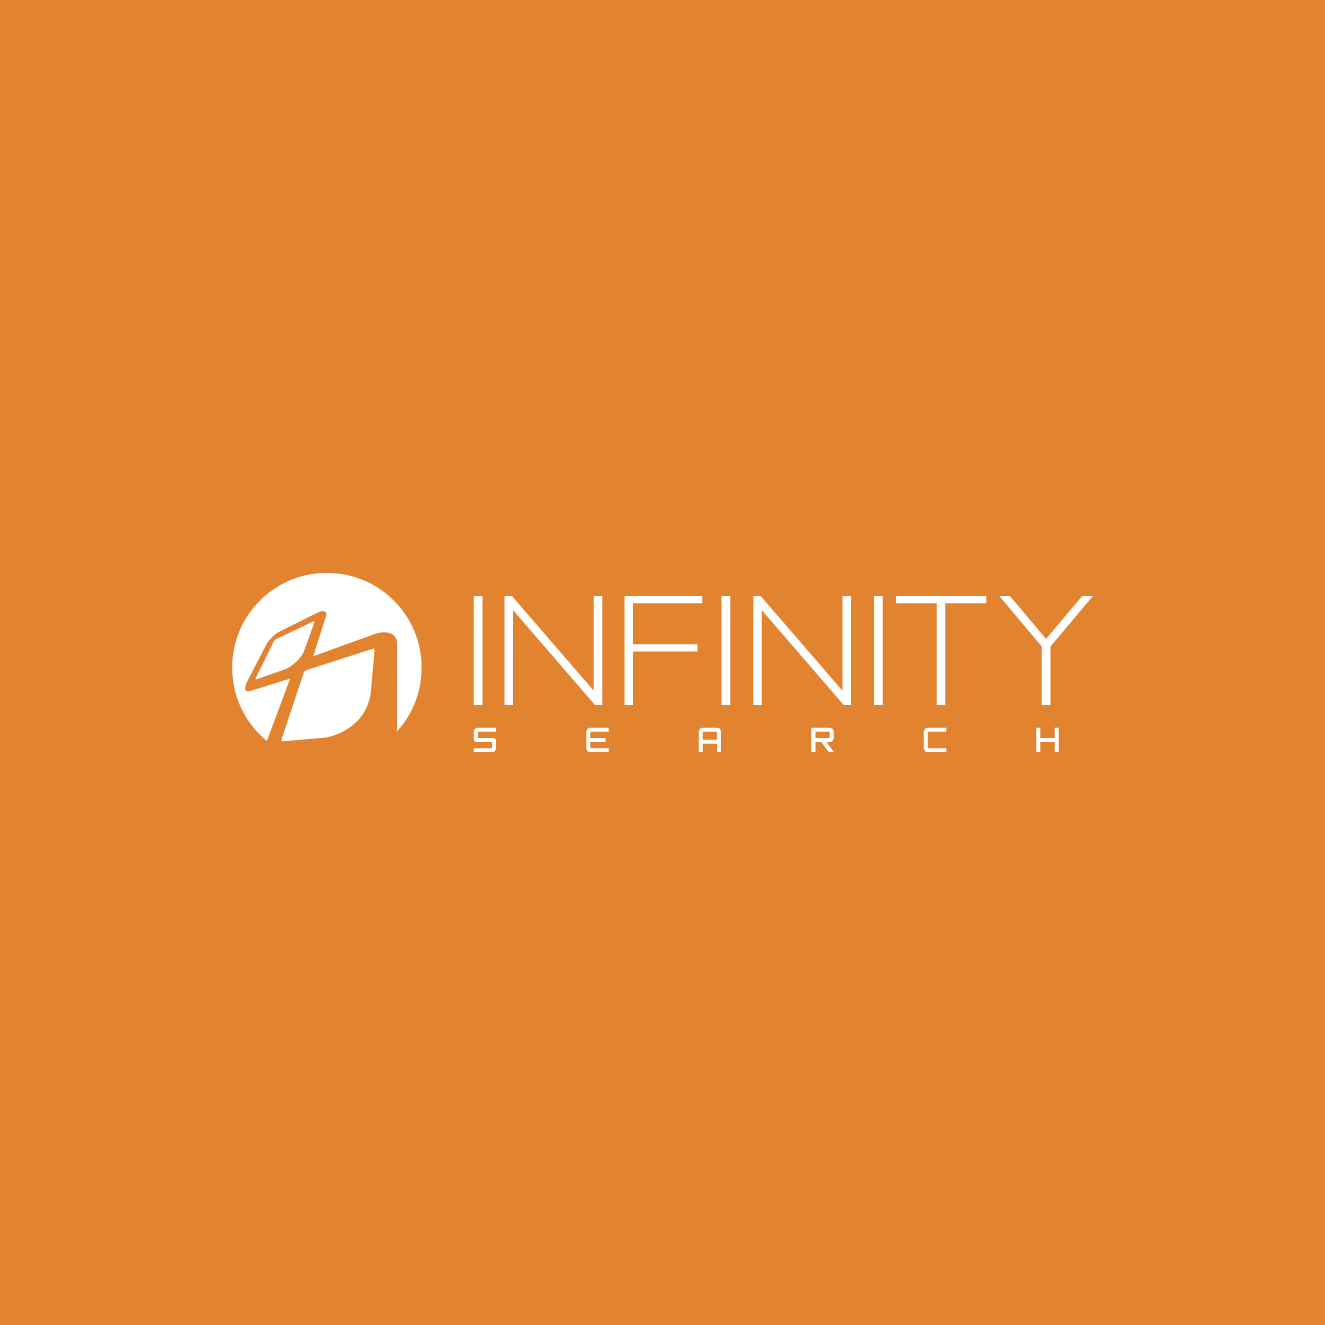 Infinity Search